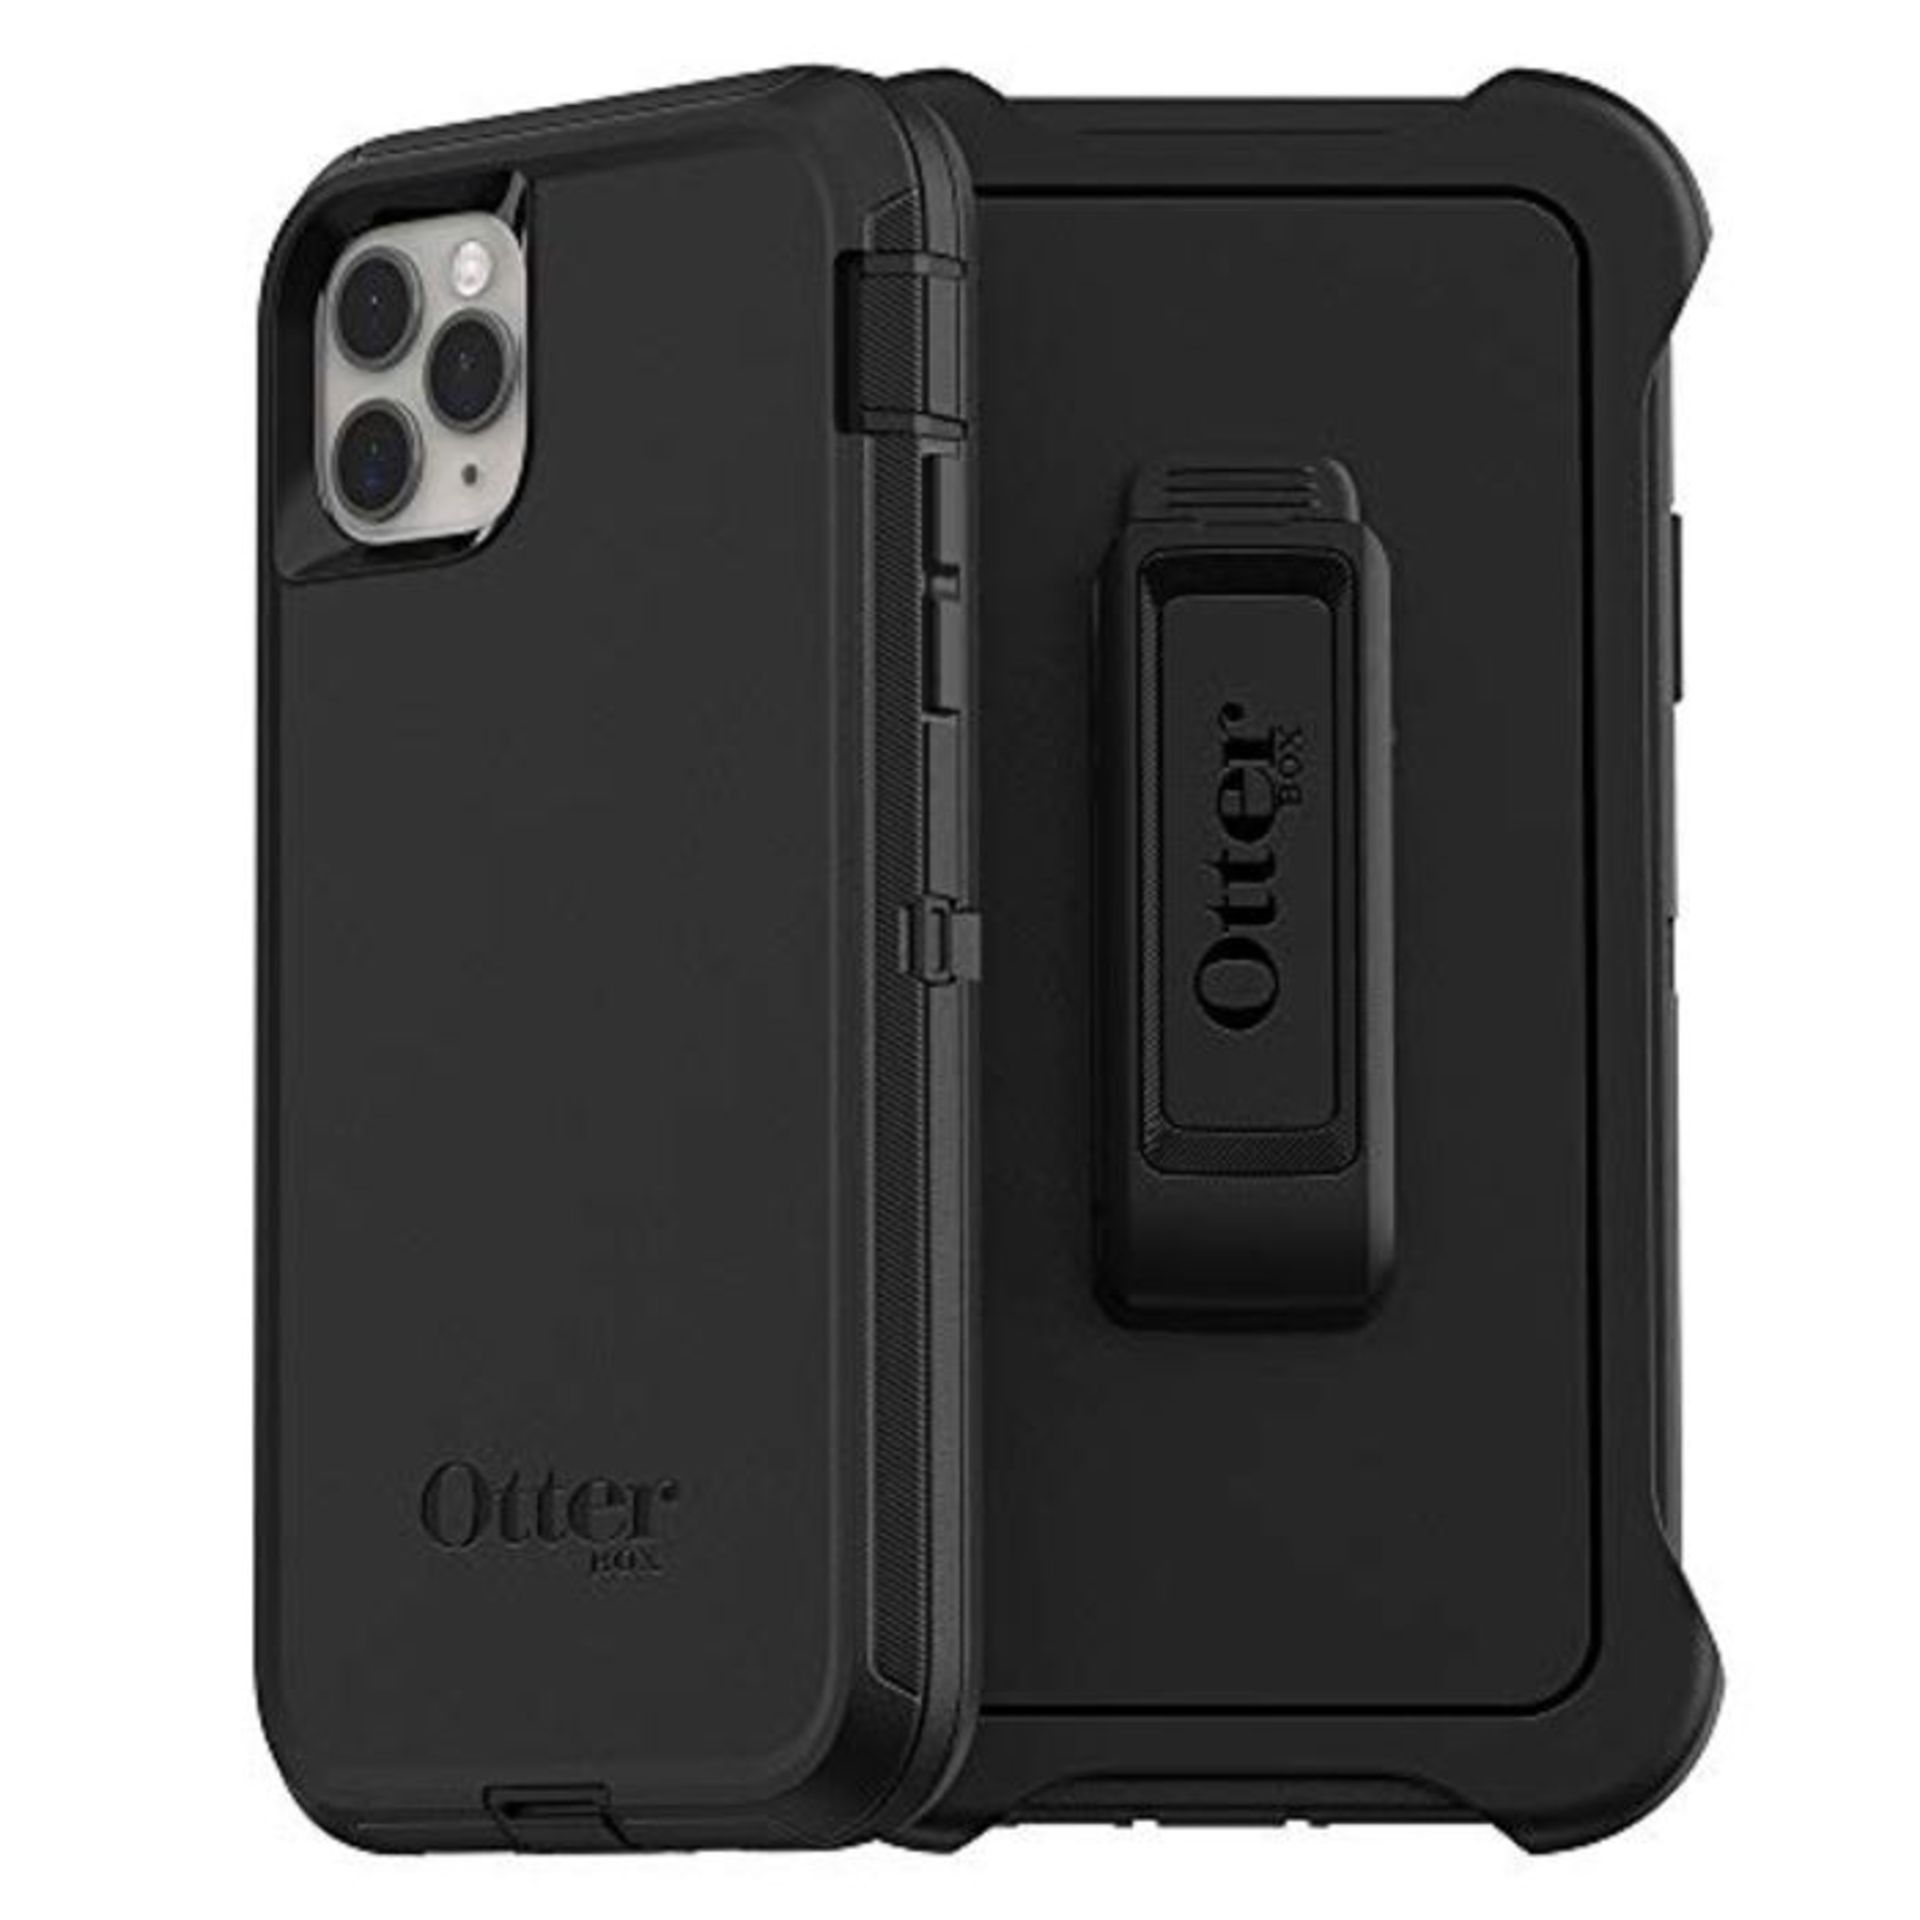 OtterBox for Apple iPhone 11 Pro Max, Superior Rugged Protective Case, Defender Series